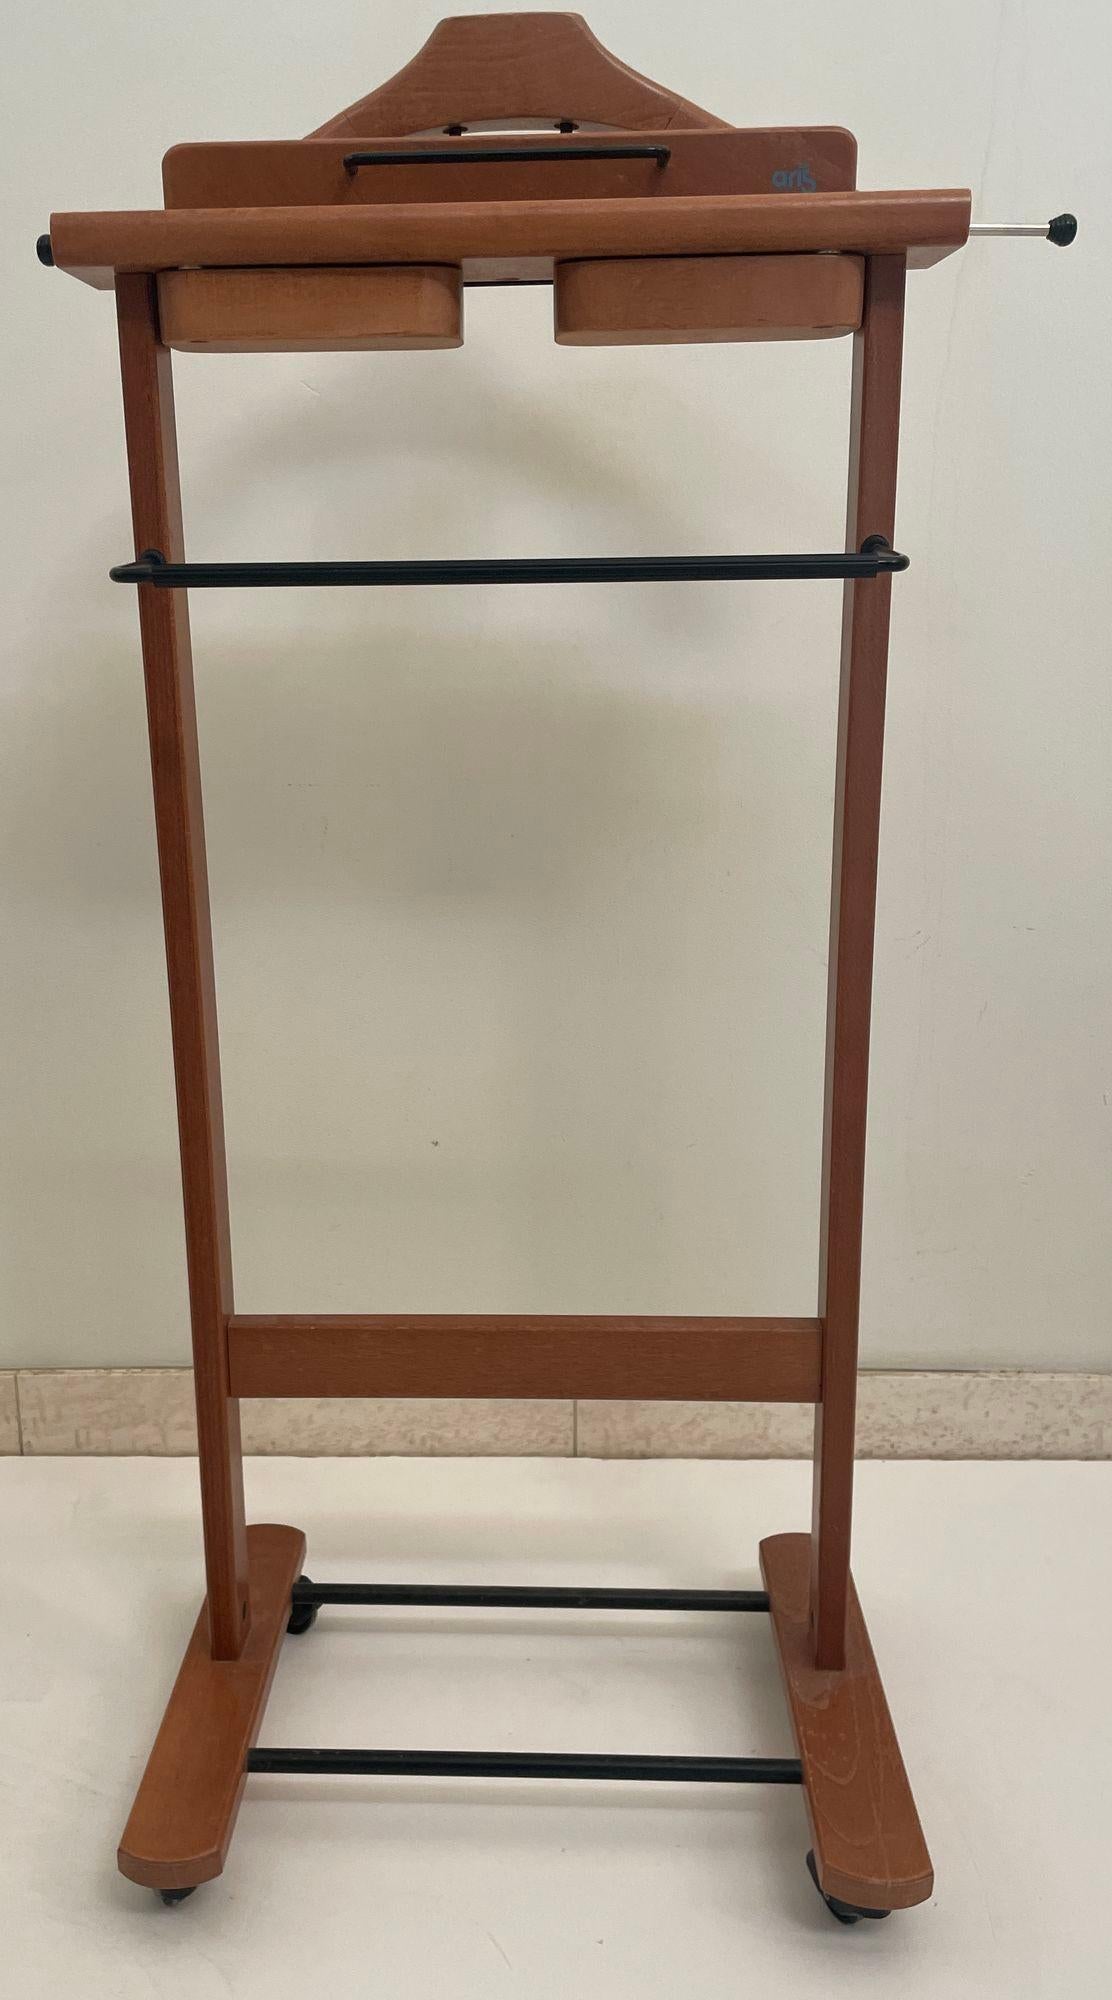 Aris Italy, Gentleman vintage wood valet by Aris of Italy.
An elegant sculptural Modernist gentleman’s valet clothing stand from the 1980s in the style of Ico & Luisa Parisi.
A beautiful Italian gentleman's valet clothing stand multi functional